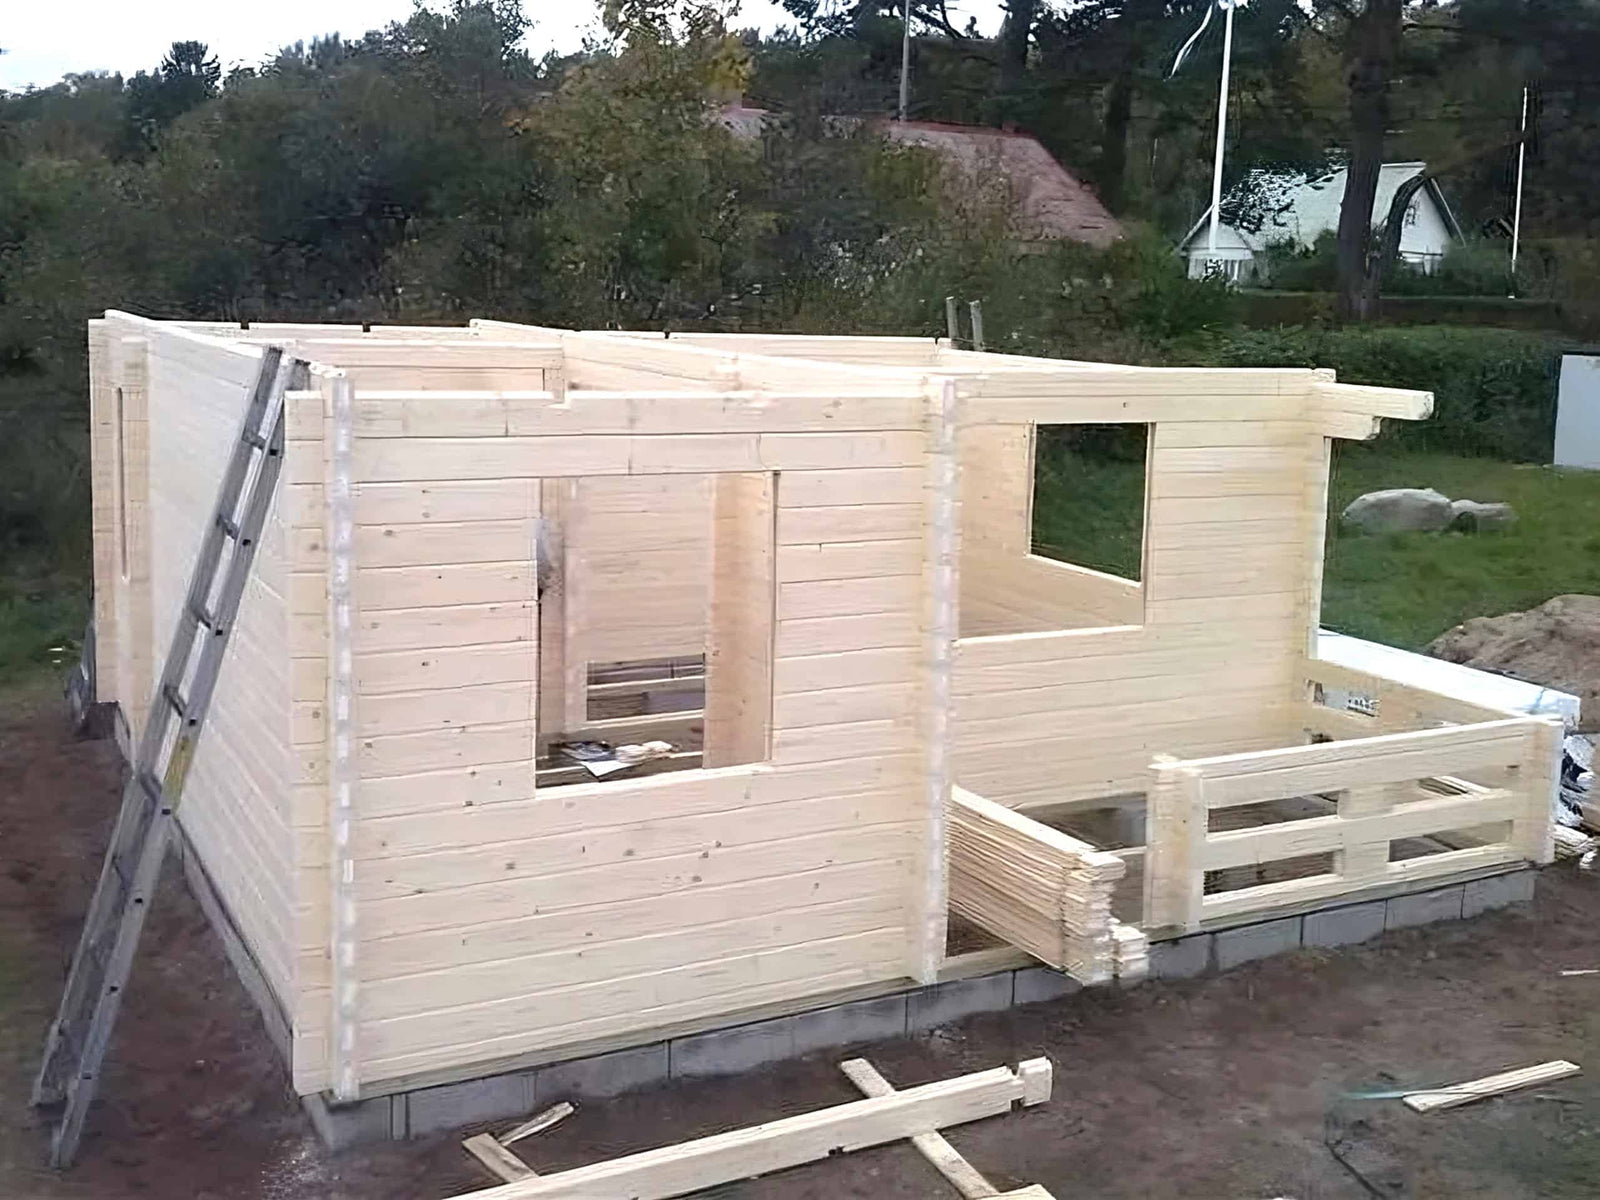 Self assembly of timber garden office (with video)